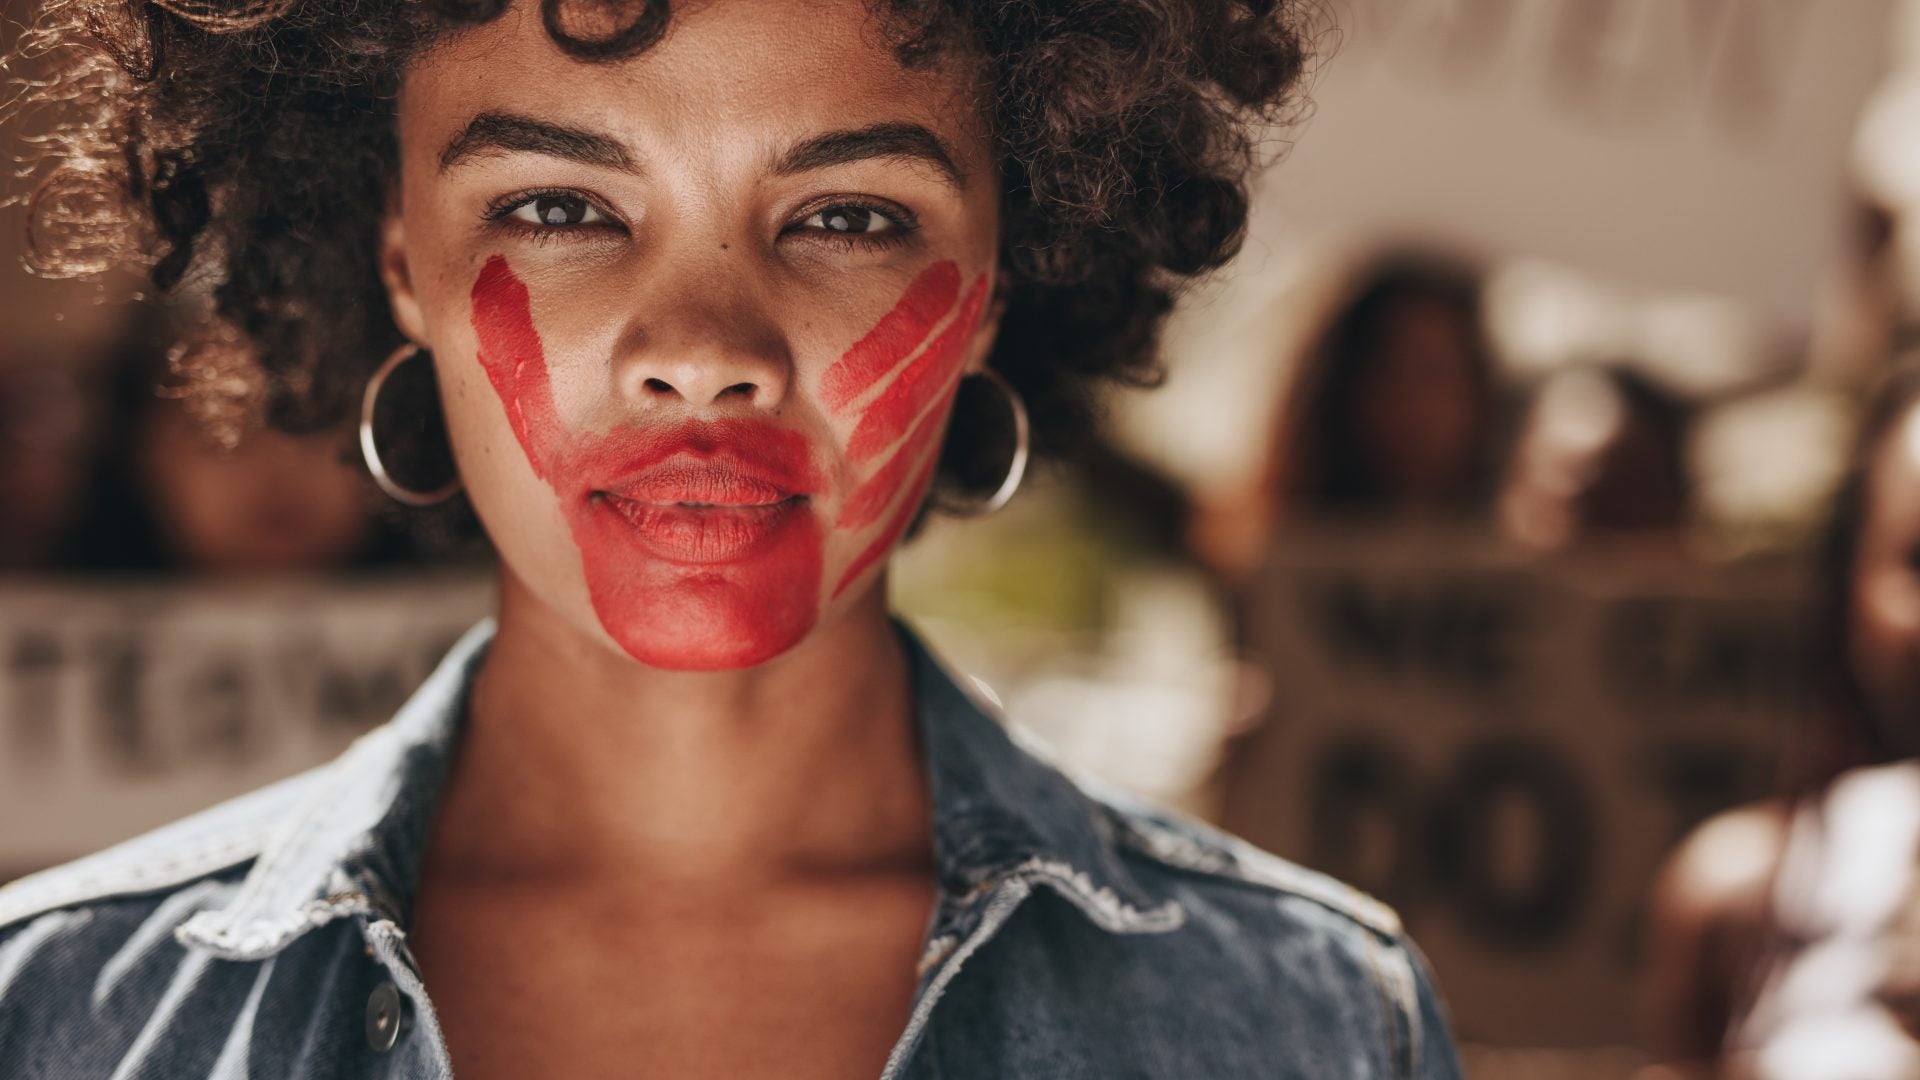 7 Steps To Take Right Now If You're A Victim Of Domestic Violence